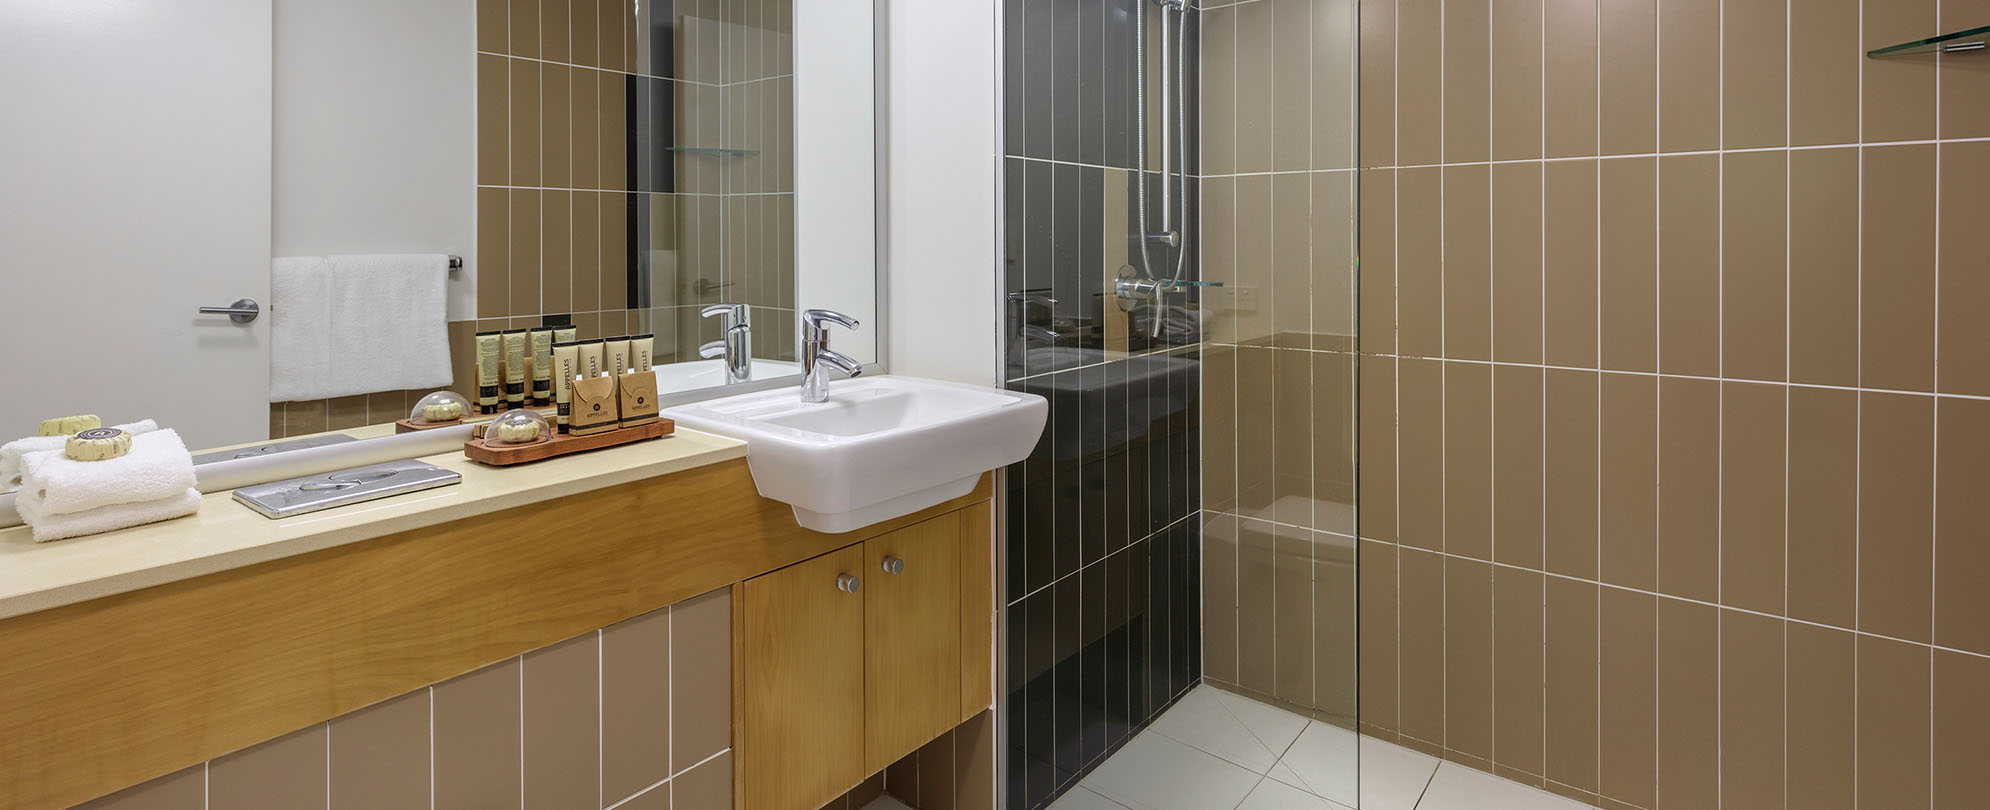 The vanity, sink, and walk-in shower in the 2-bedroom grand suite at Club Wyndham Coffs Harbor.